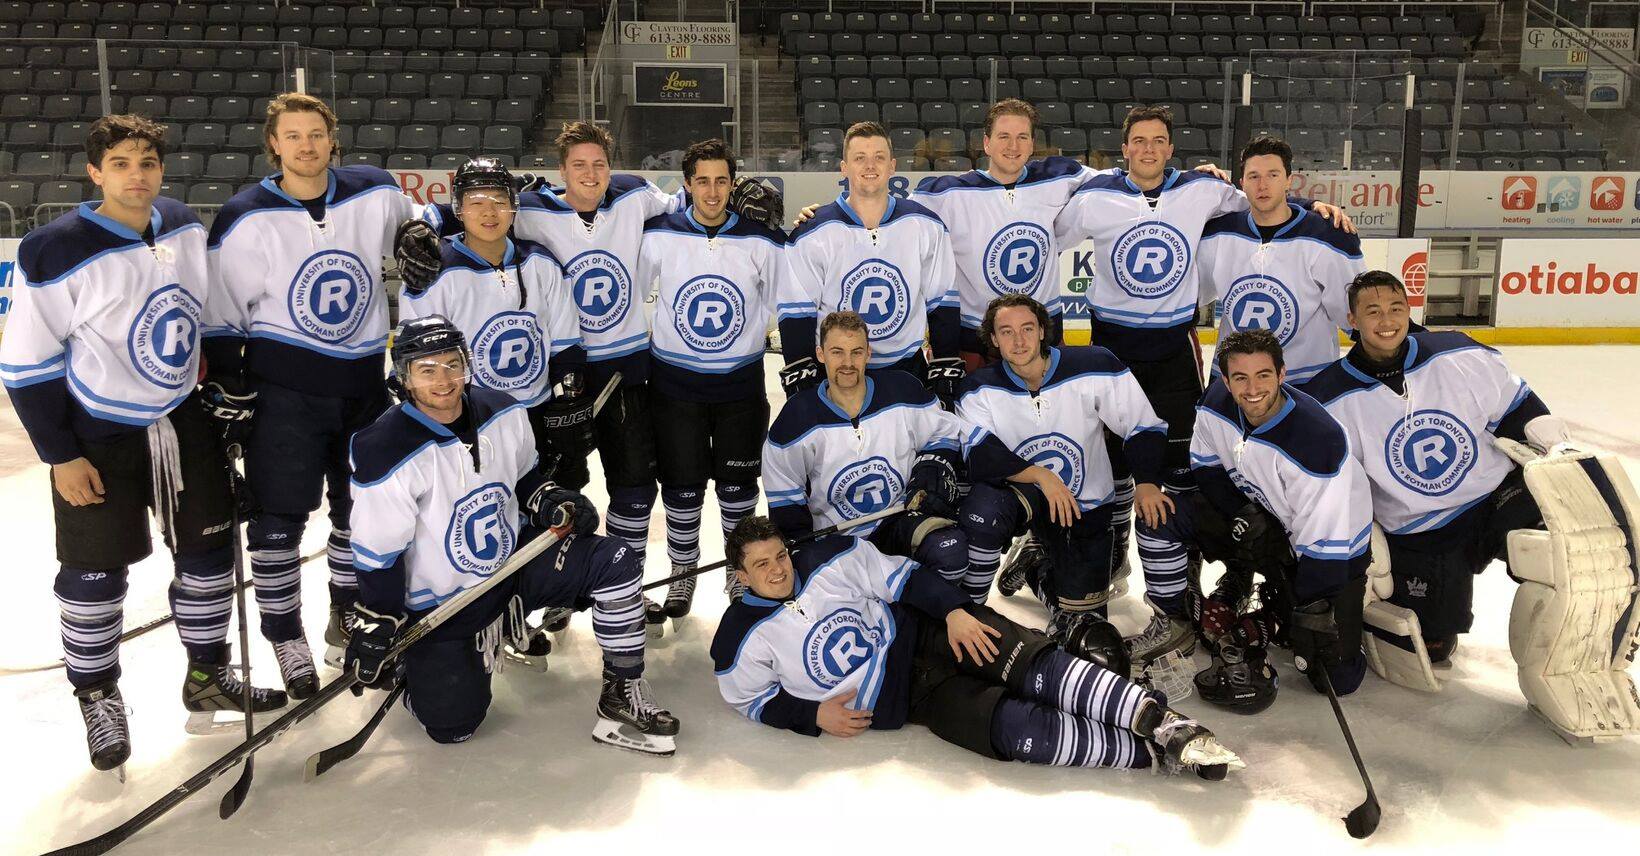 Group of people on an ice rink wearing hockey attire. The jerseys say University of Toronto Rotman Commerce.